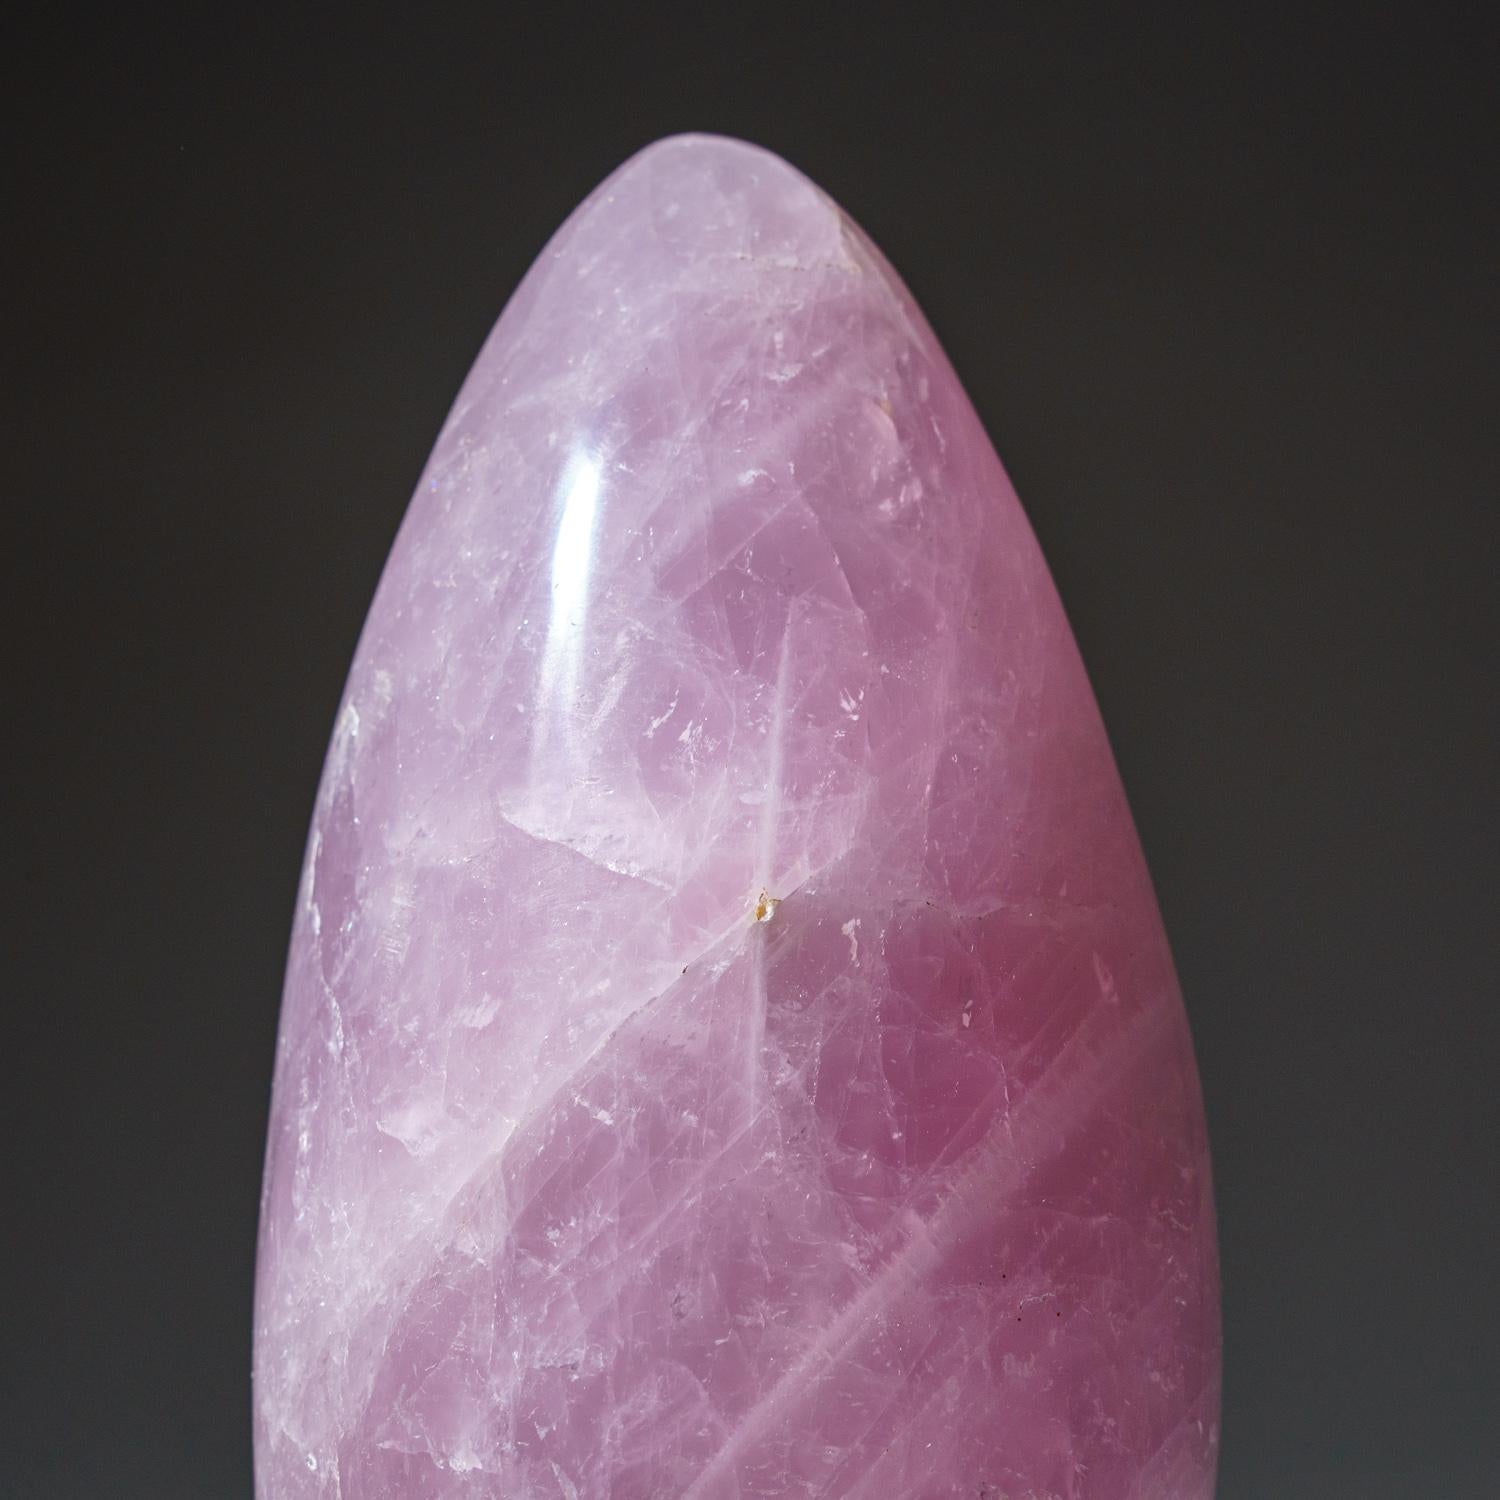 This museum quality, large freeform is carved from a solid piece of natural, gem quality Rose Quartz. This piece has remarkable transparency with a warm pink color. Hand polished to a mirrored finish.

Rose Quartz is the stone of unconditional